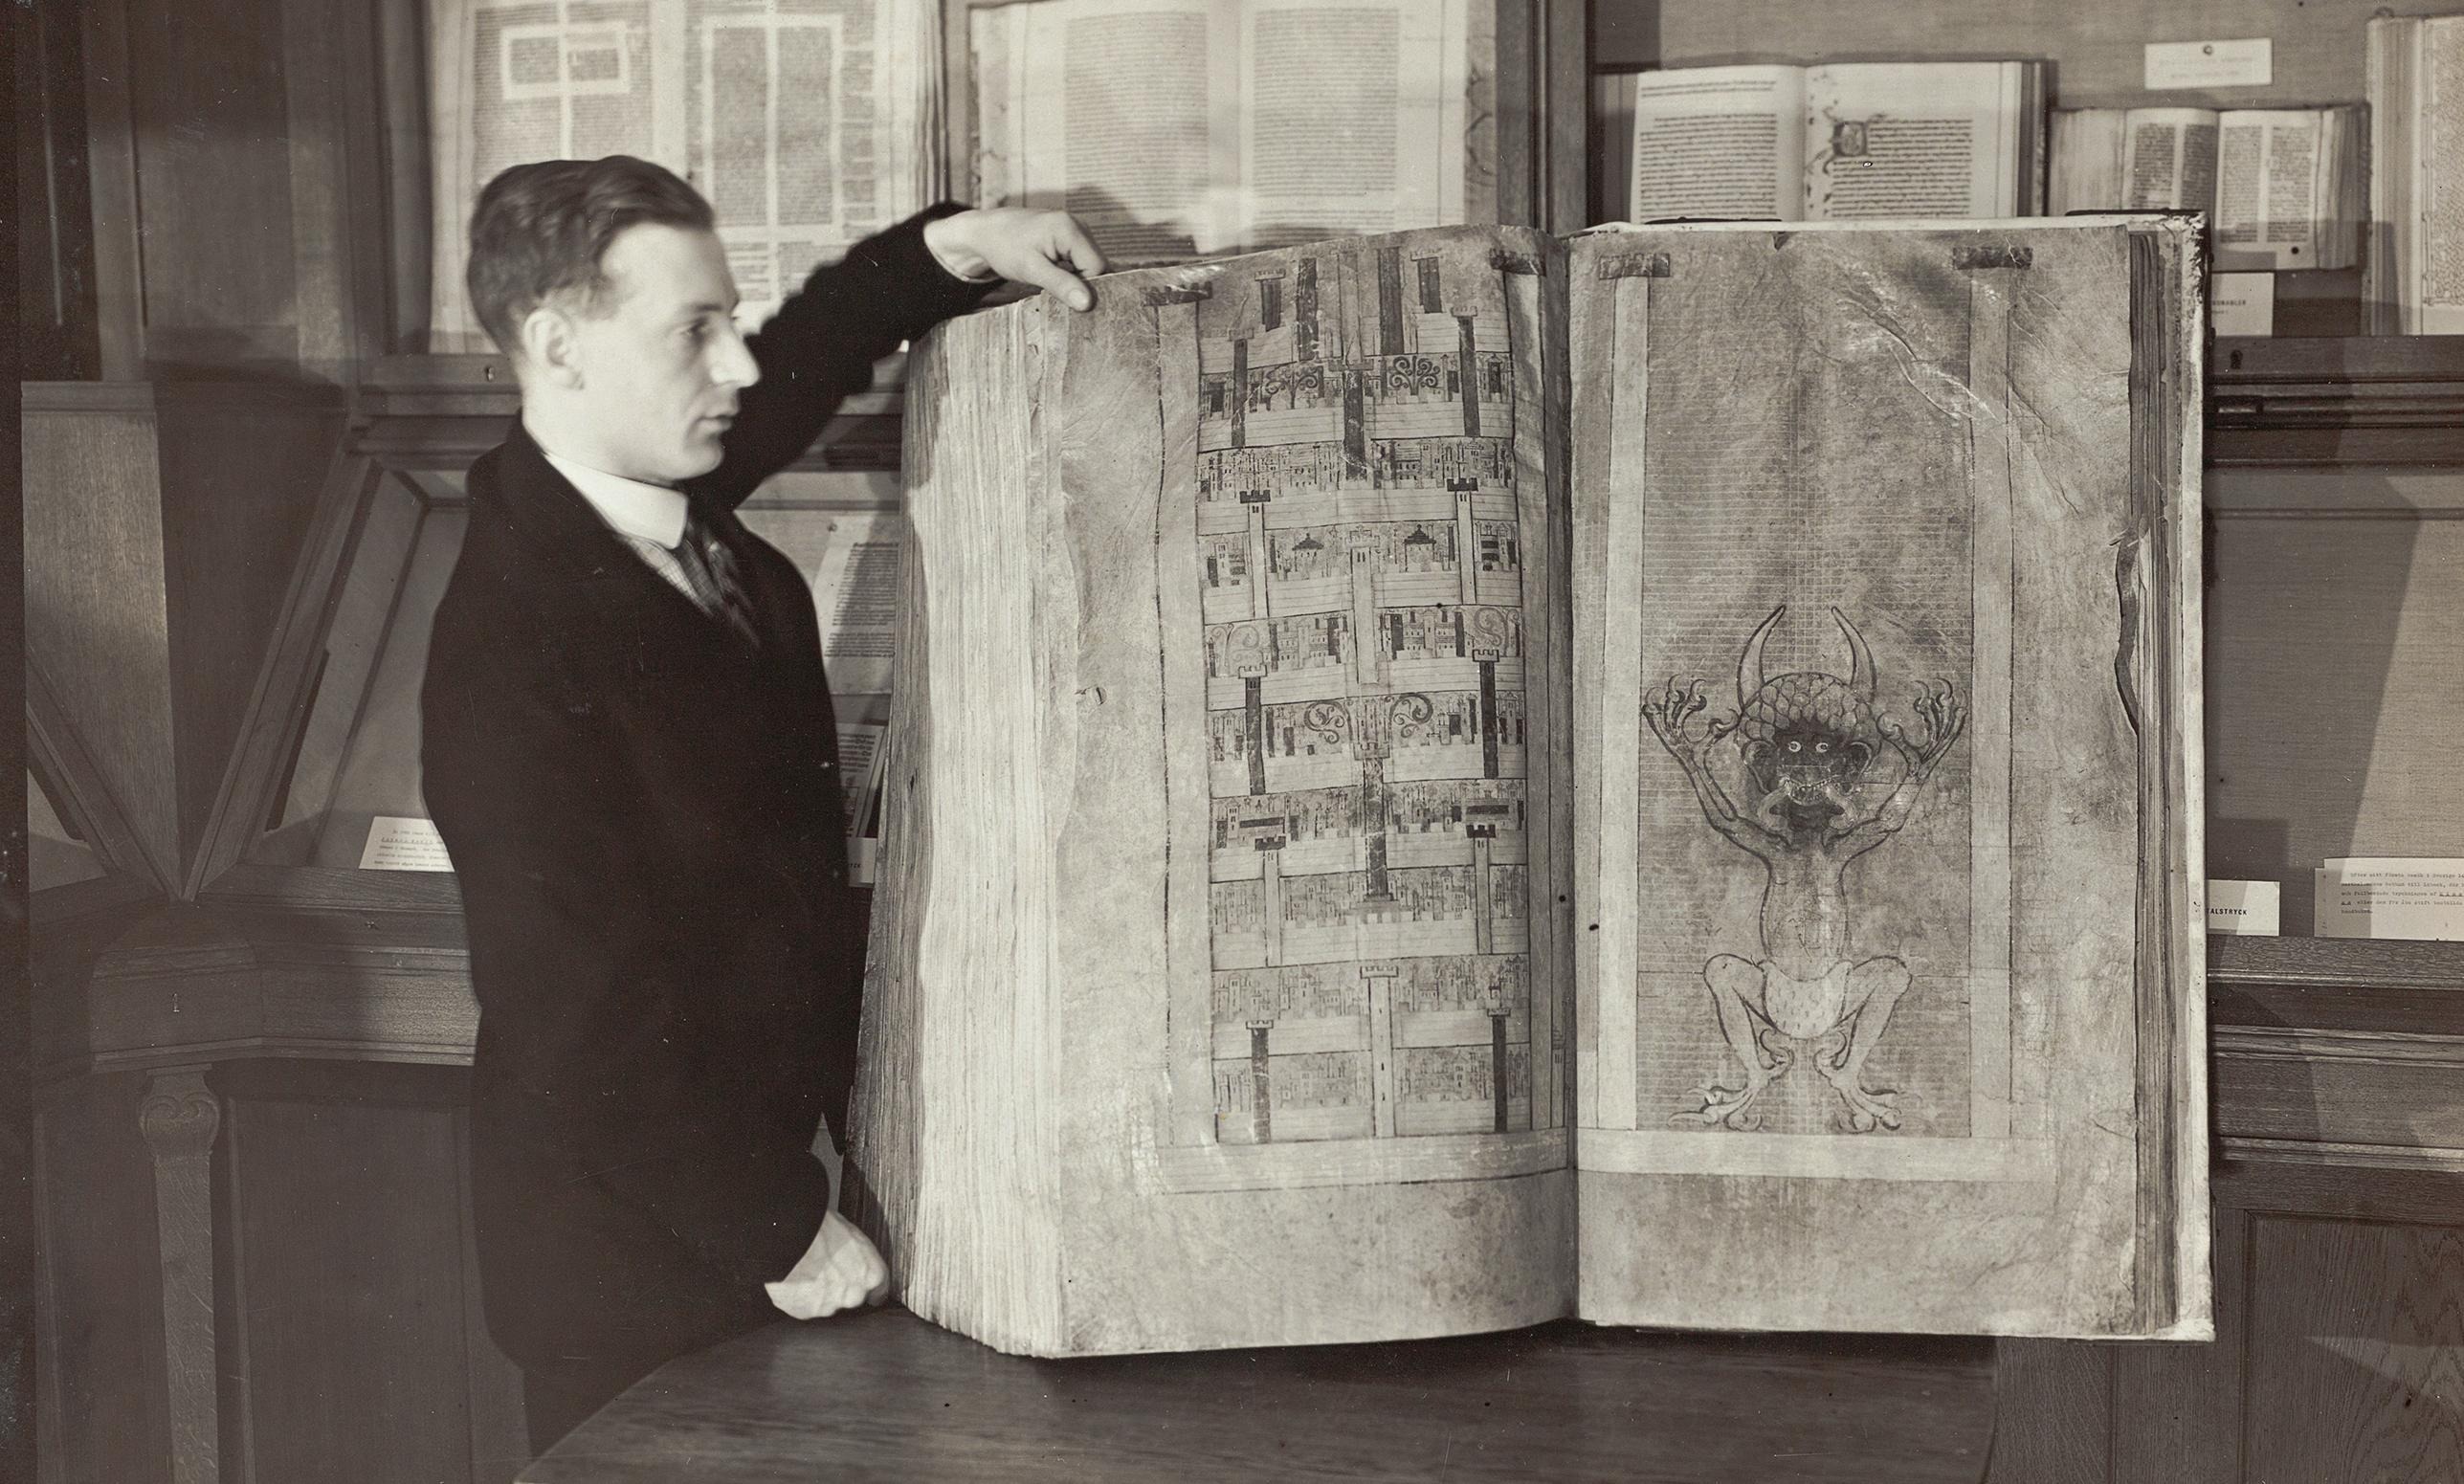 A black and white photo of a man showing a giant book.